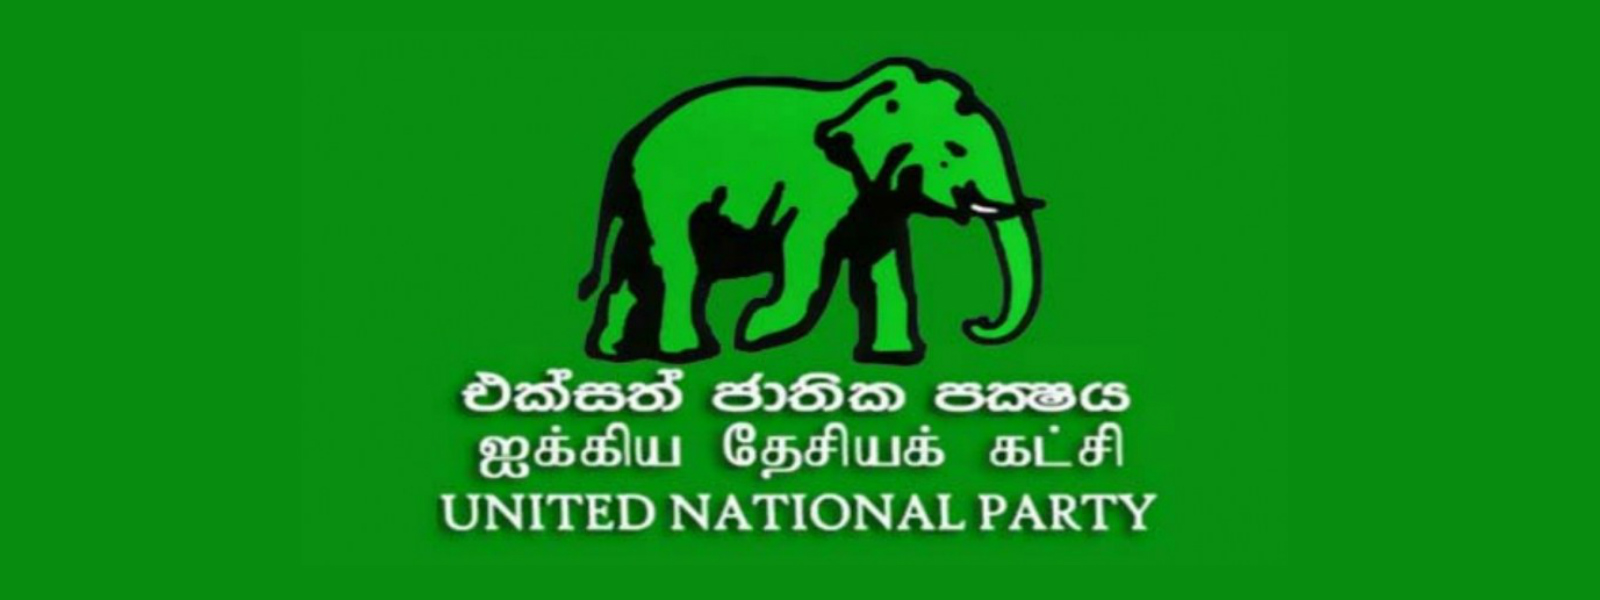 Constitution of new alliance approved by UNP